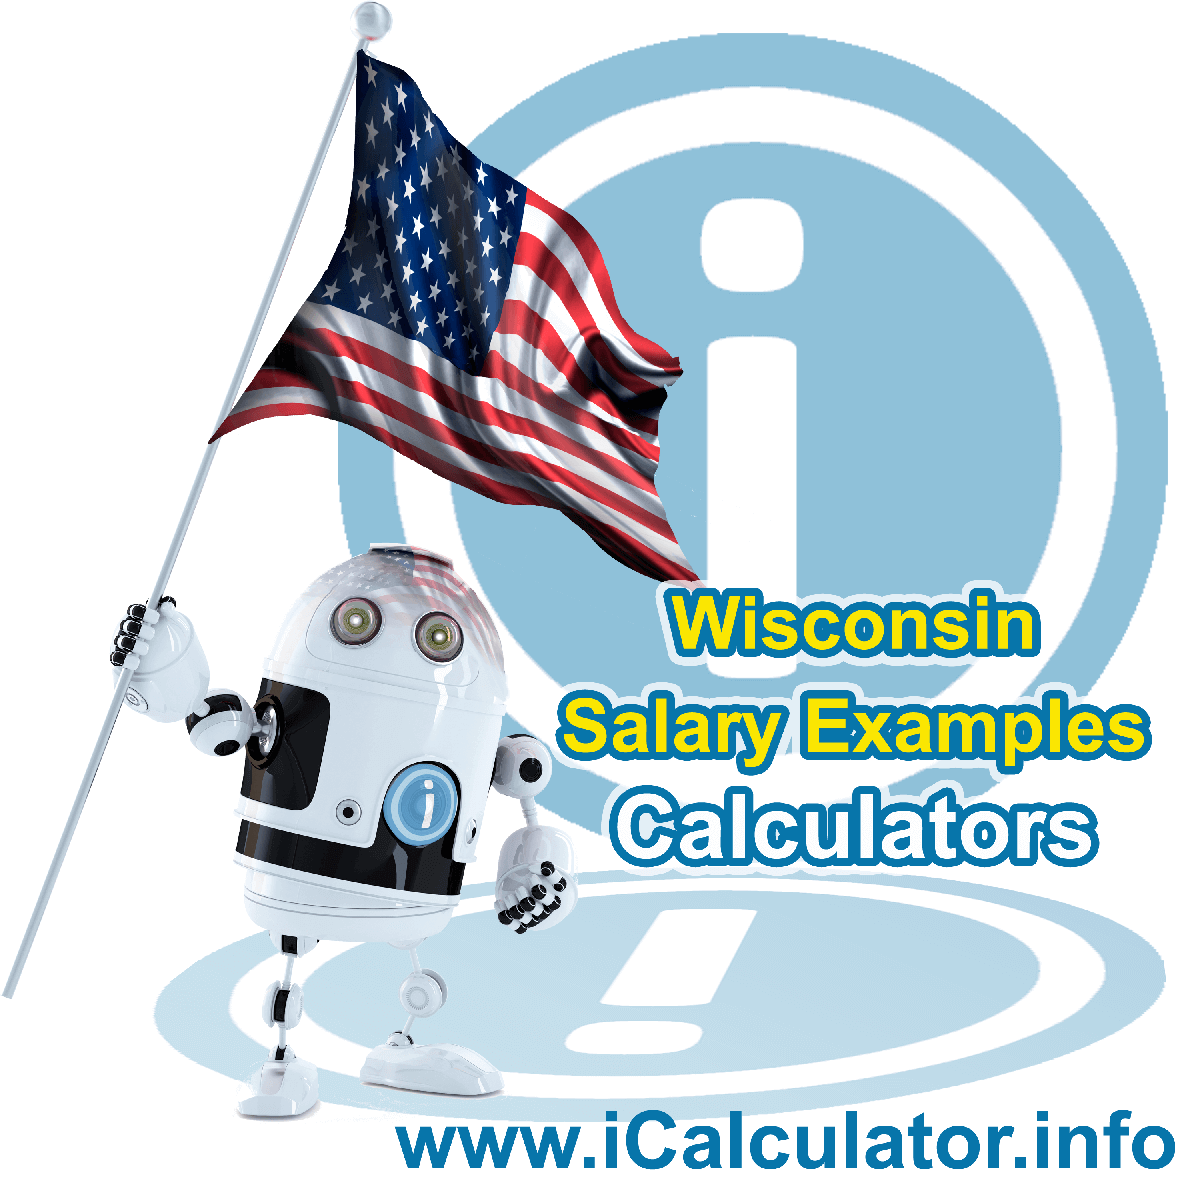 Wisconsin Salary Example for $ 70,000.00 in 2023 | iCalculator™ | $ 70,000.00 salary example for employee and employer paying Wisconsin State tincome taxes. Detailed salary after tax calculation including Wisconsin State Tax, Federal State Tax, Medicare Deductions, Social Security, Capital Gains and other income tax and salary deductions complete with supporting Wisconsin state tax tables 